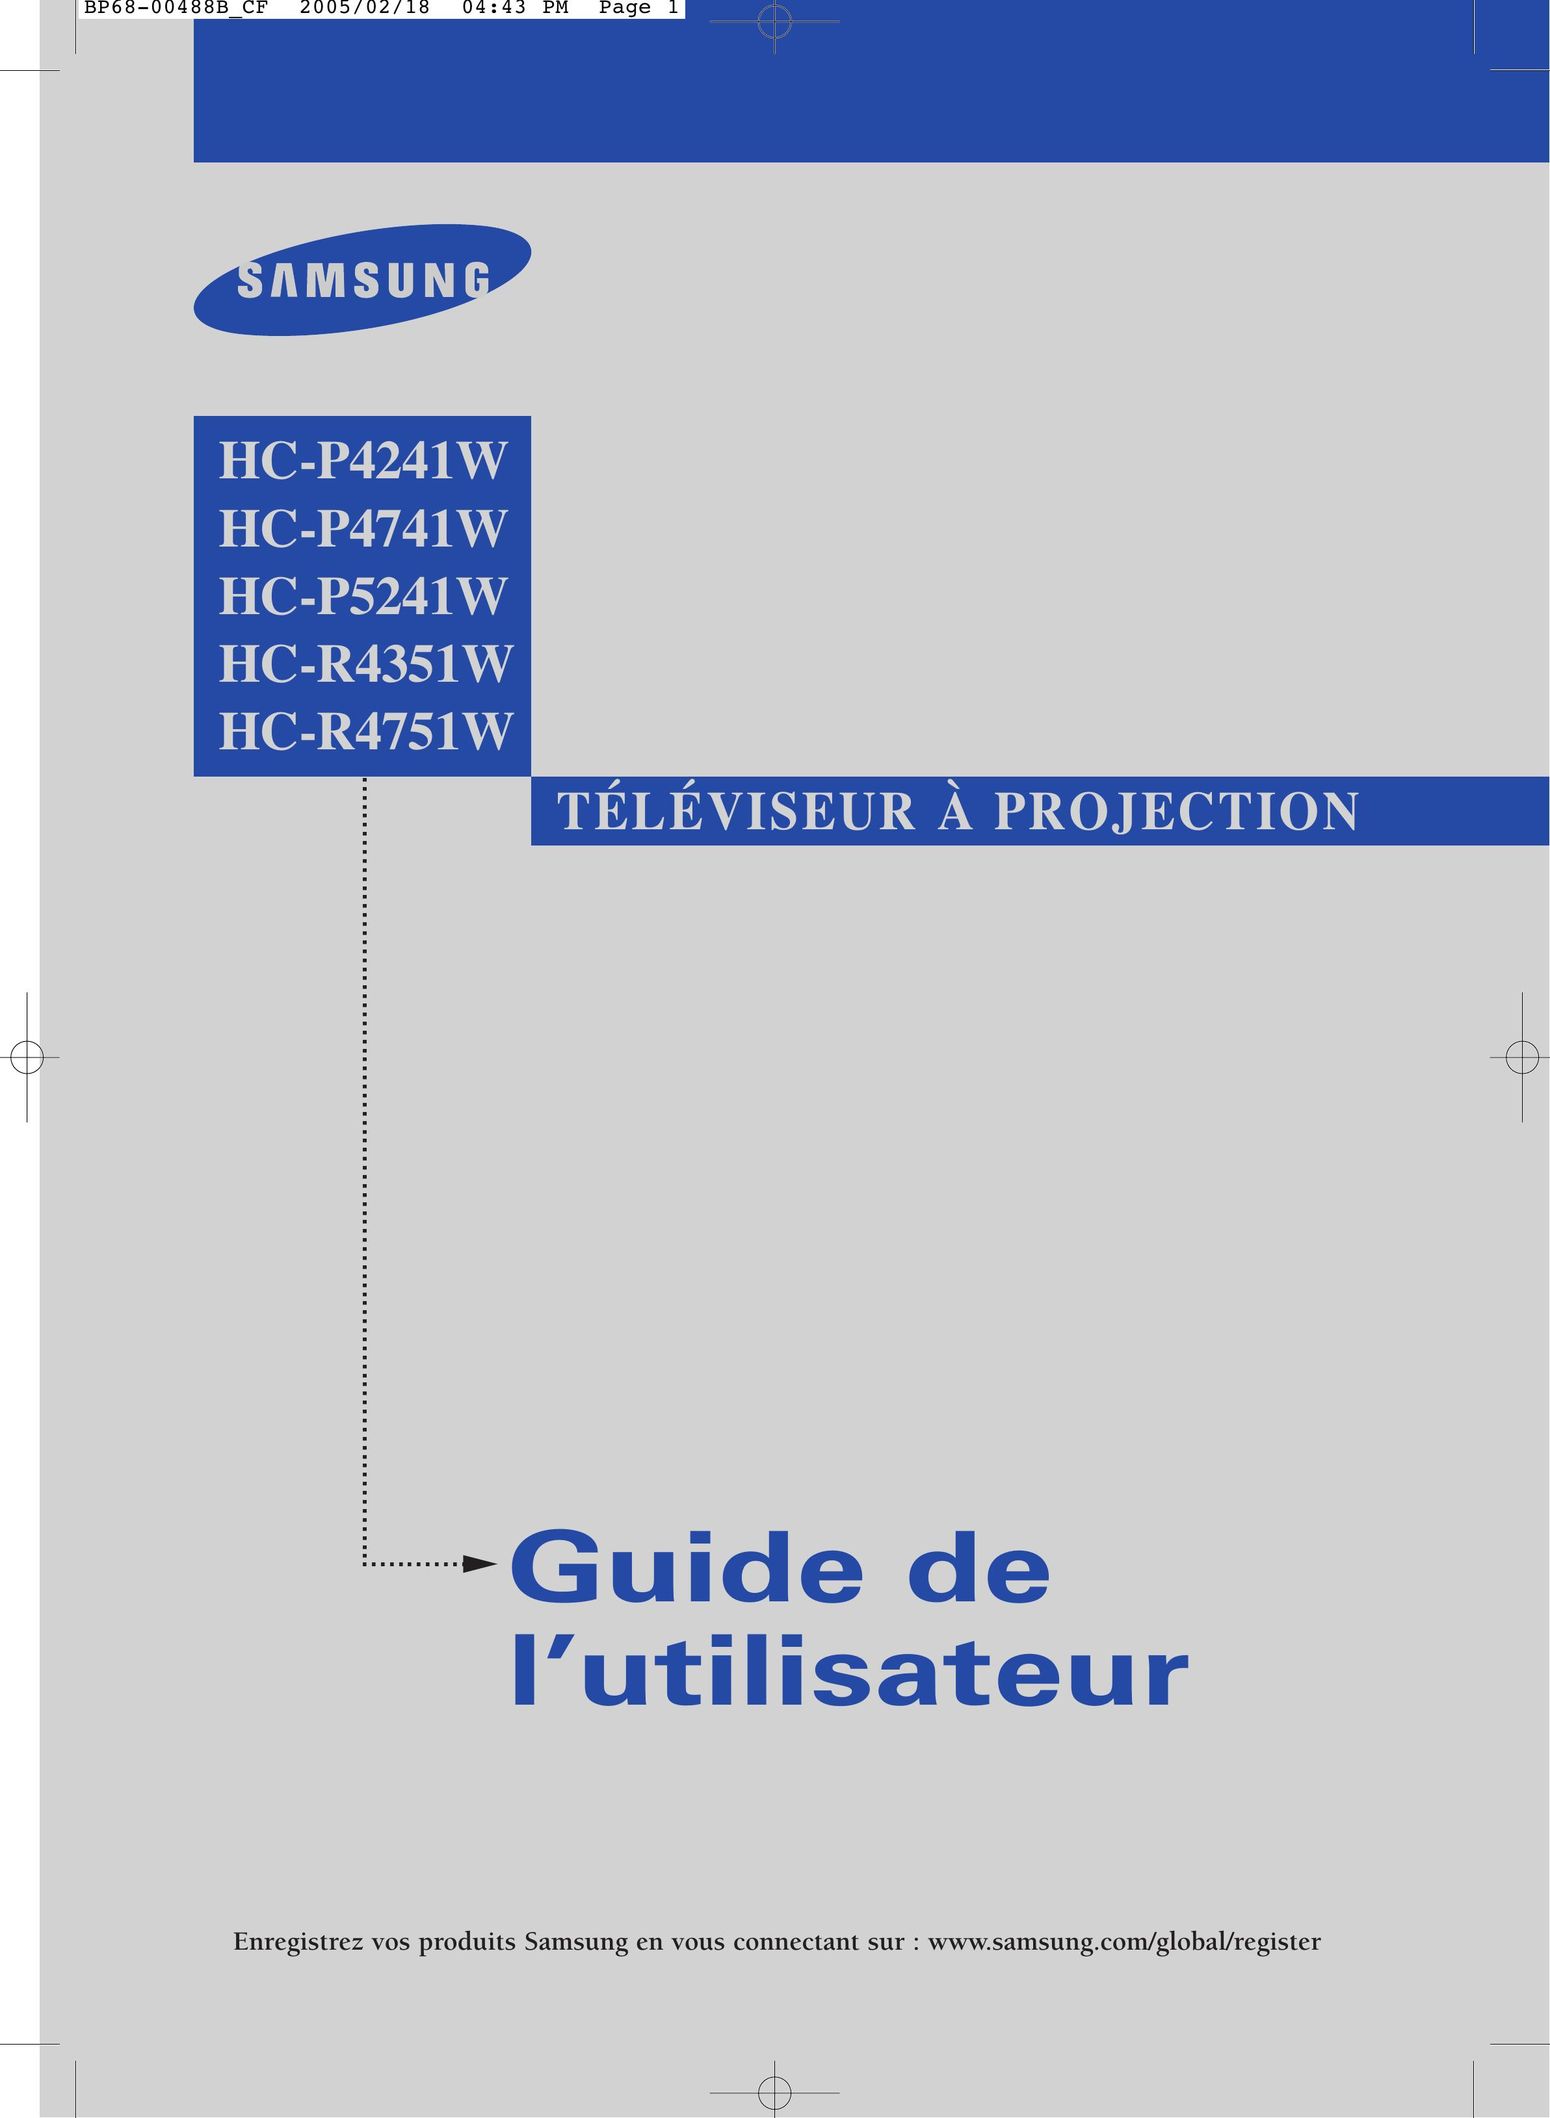 Samsung HC P5241W Projection Television User Manual